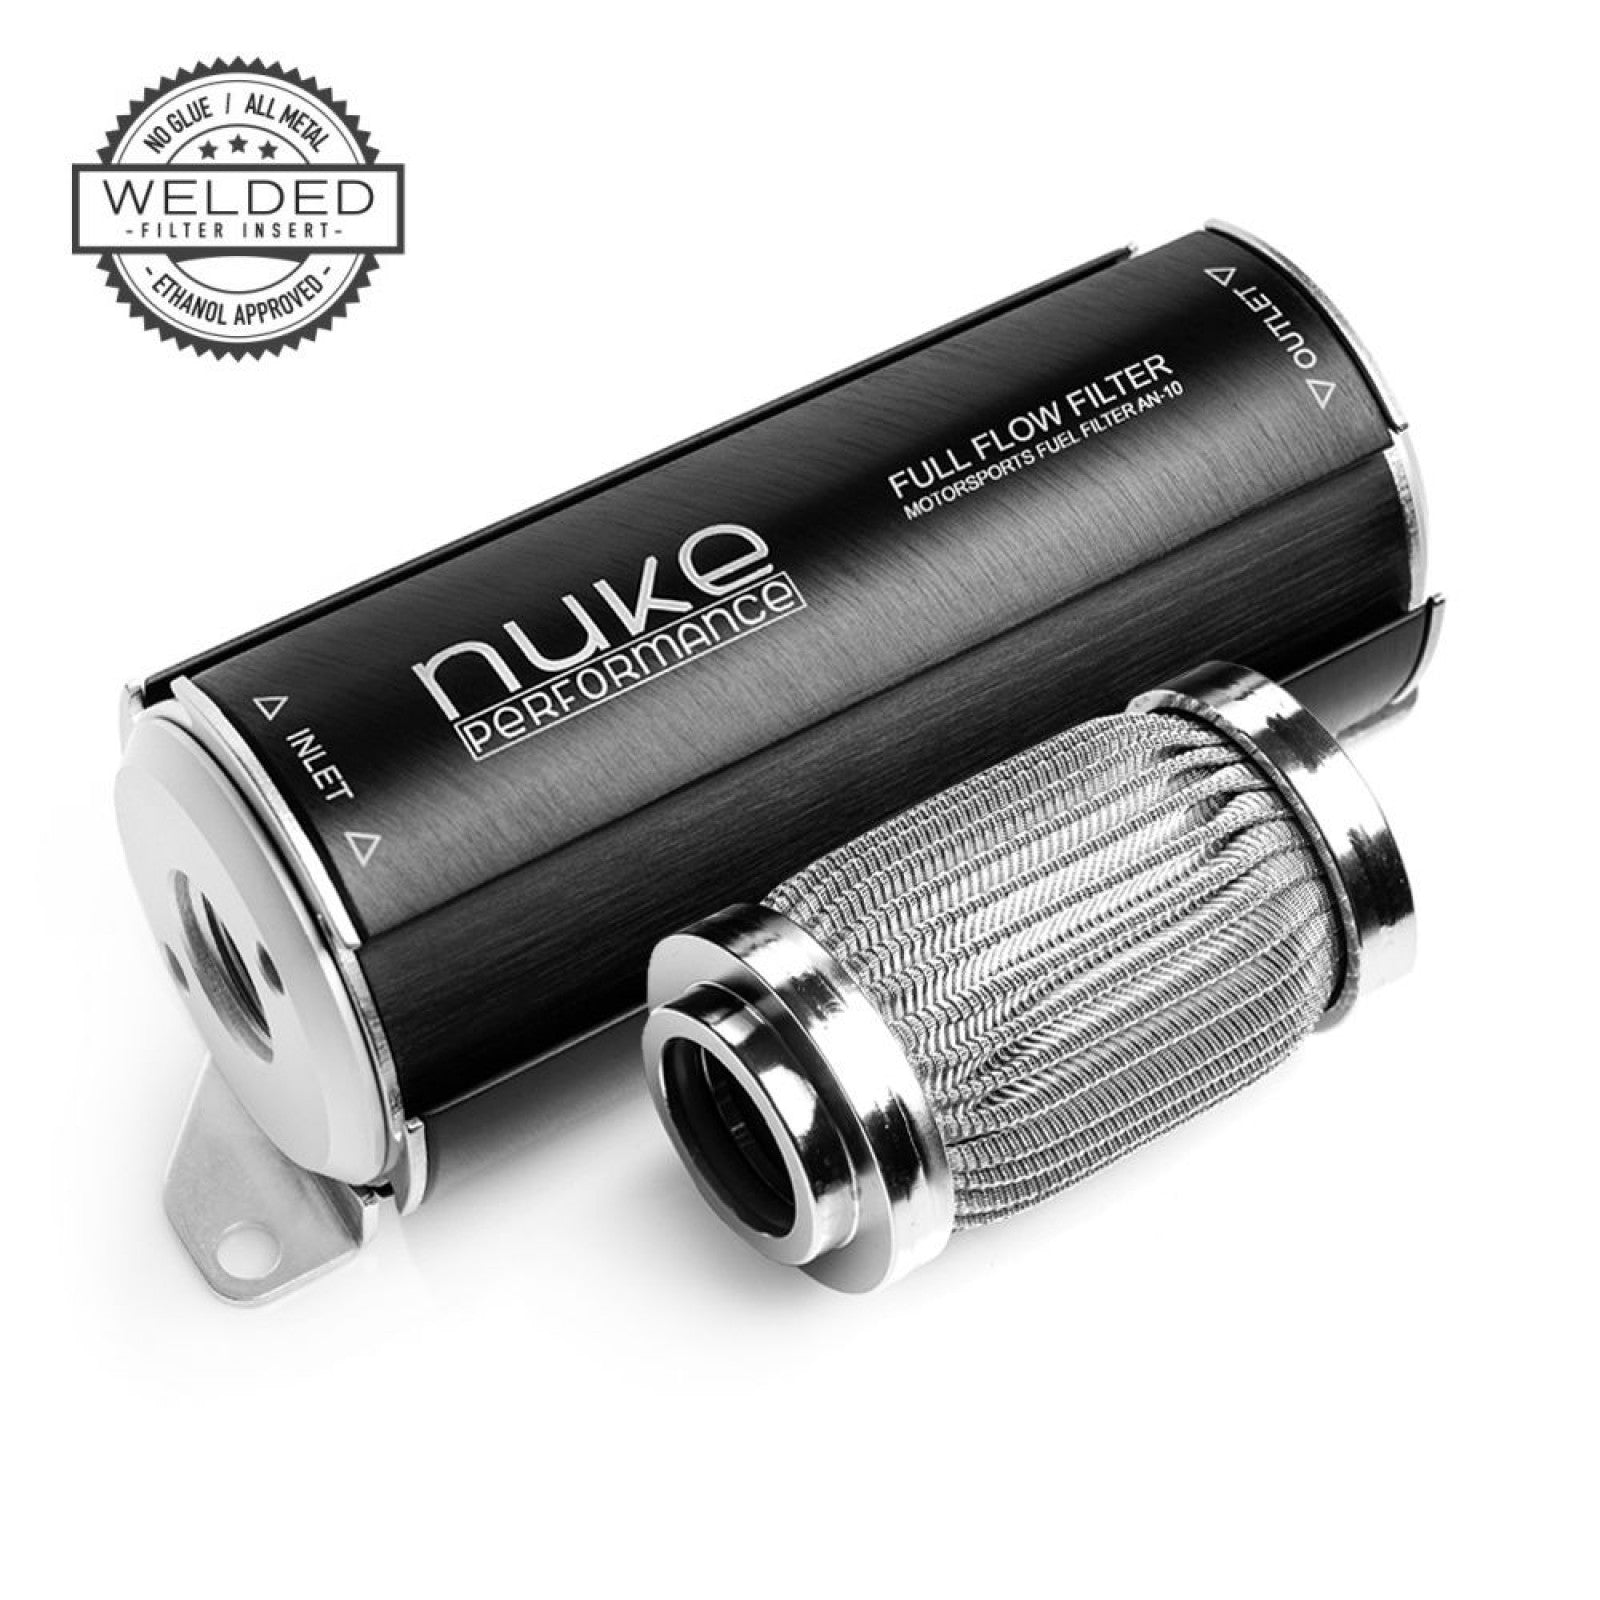 Nuke Performance Fuel Filter 10 micron AN-10 – Cellulose filter element